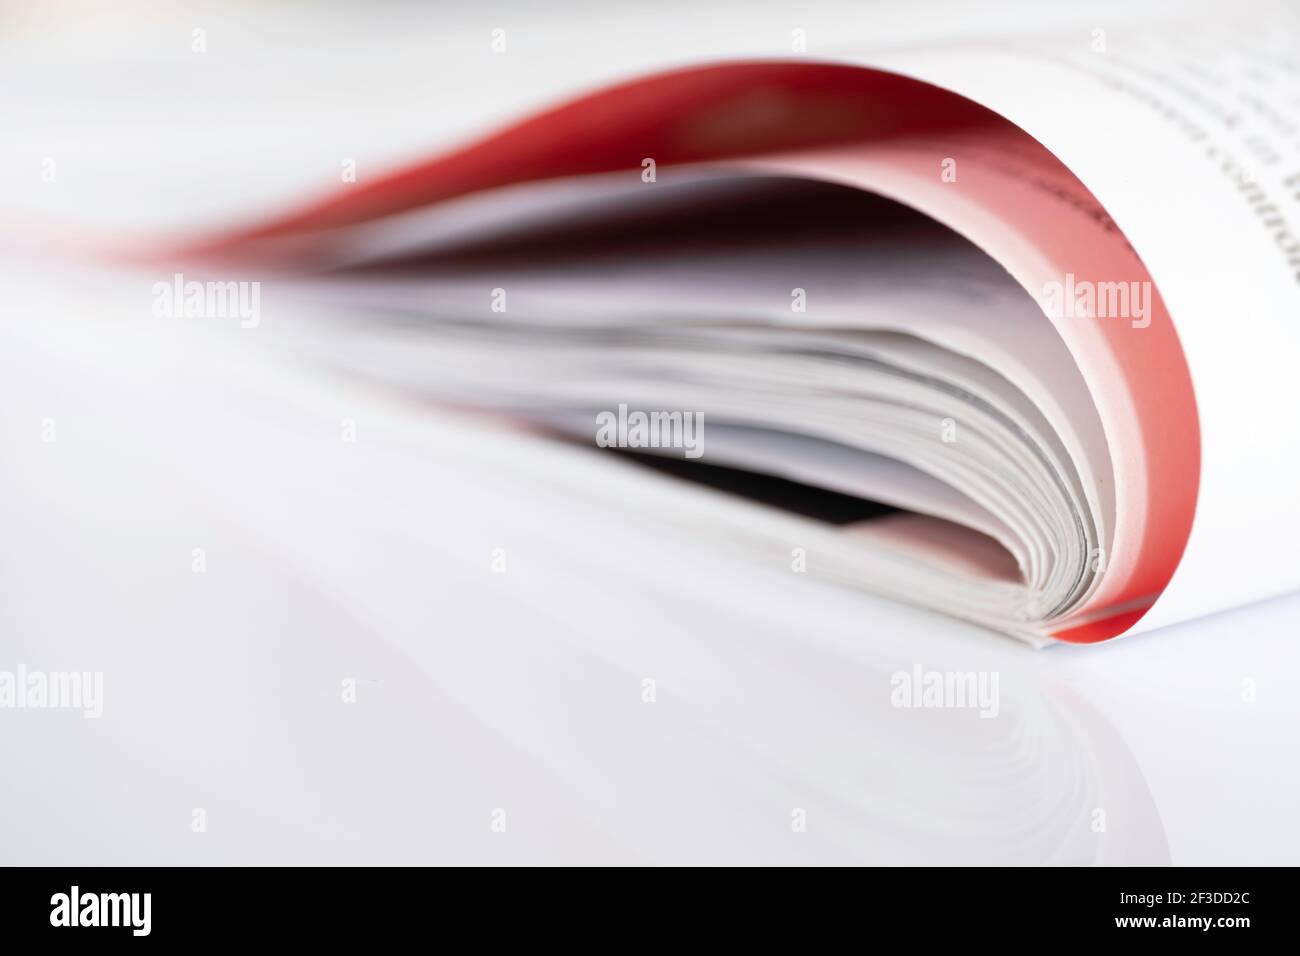 Folded magazine with red page reflected on a white surface with shallow depth of field Stock Photo